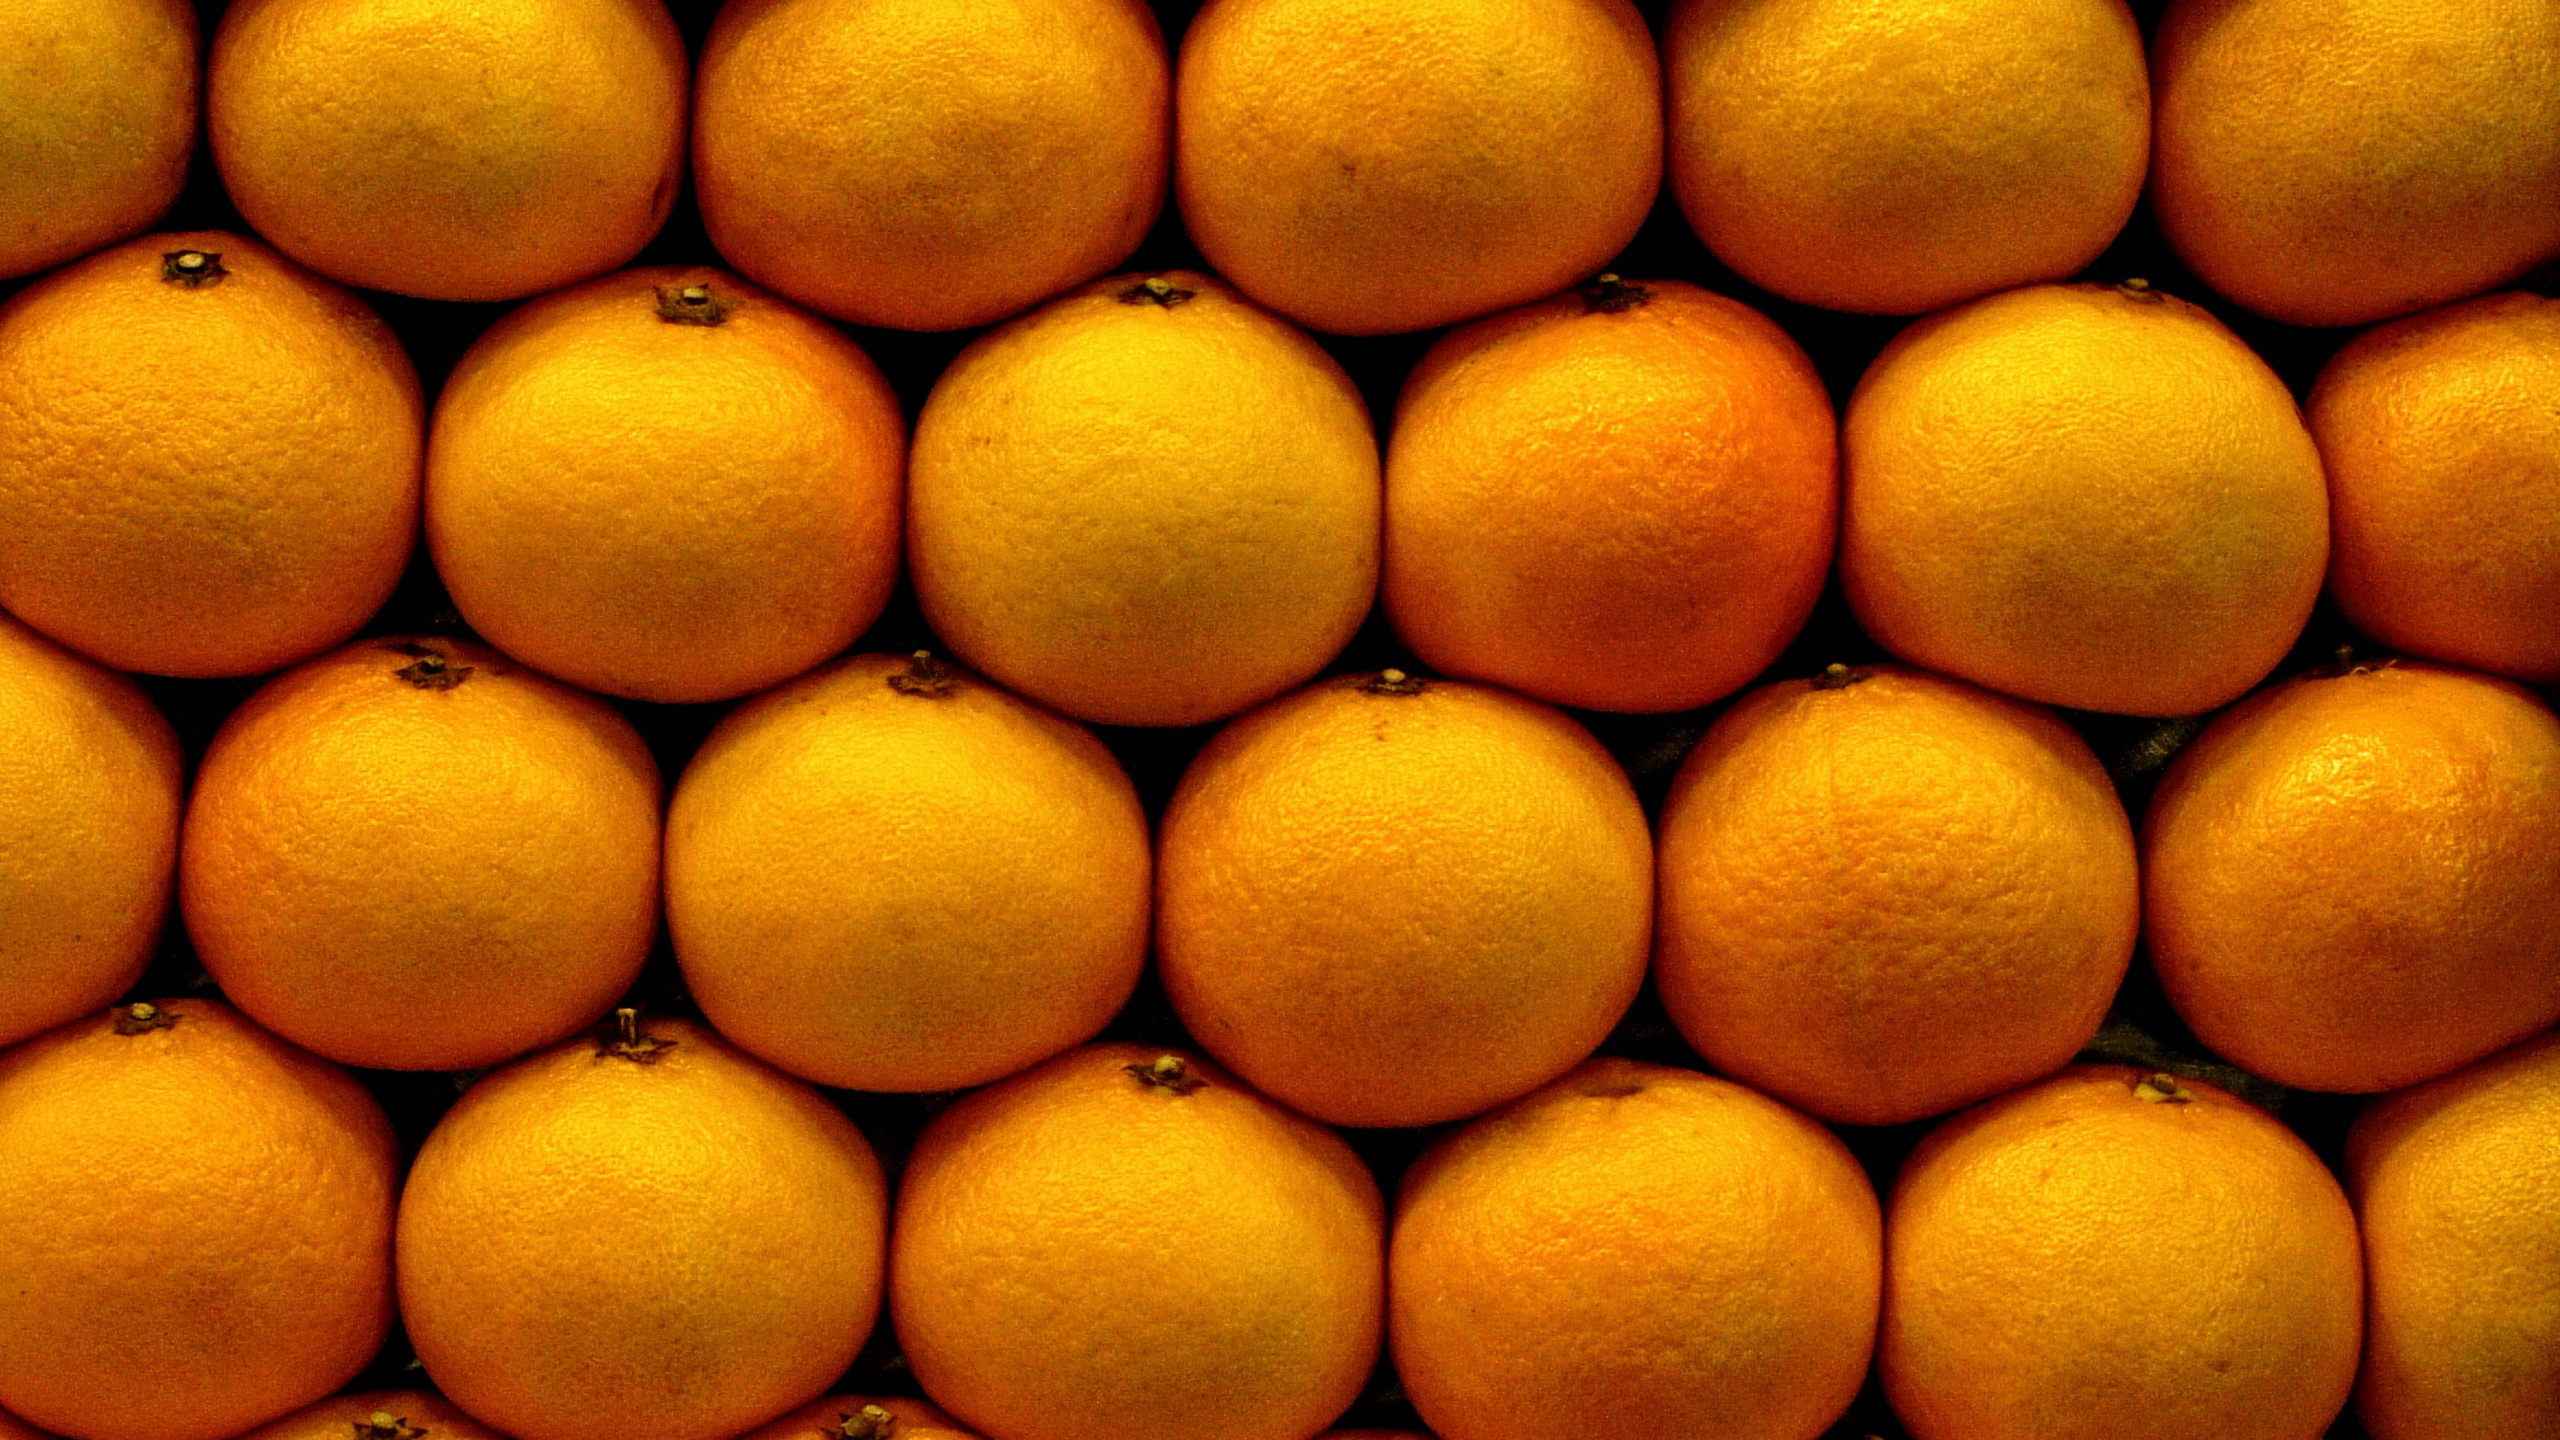 Yellow Round Fruits on White Surface. Wallpaper in 2560x1440 Resolution